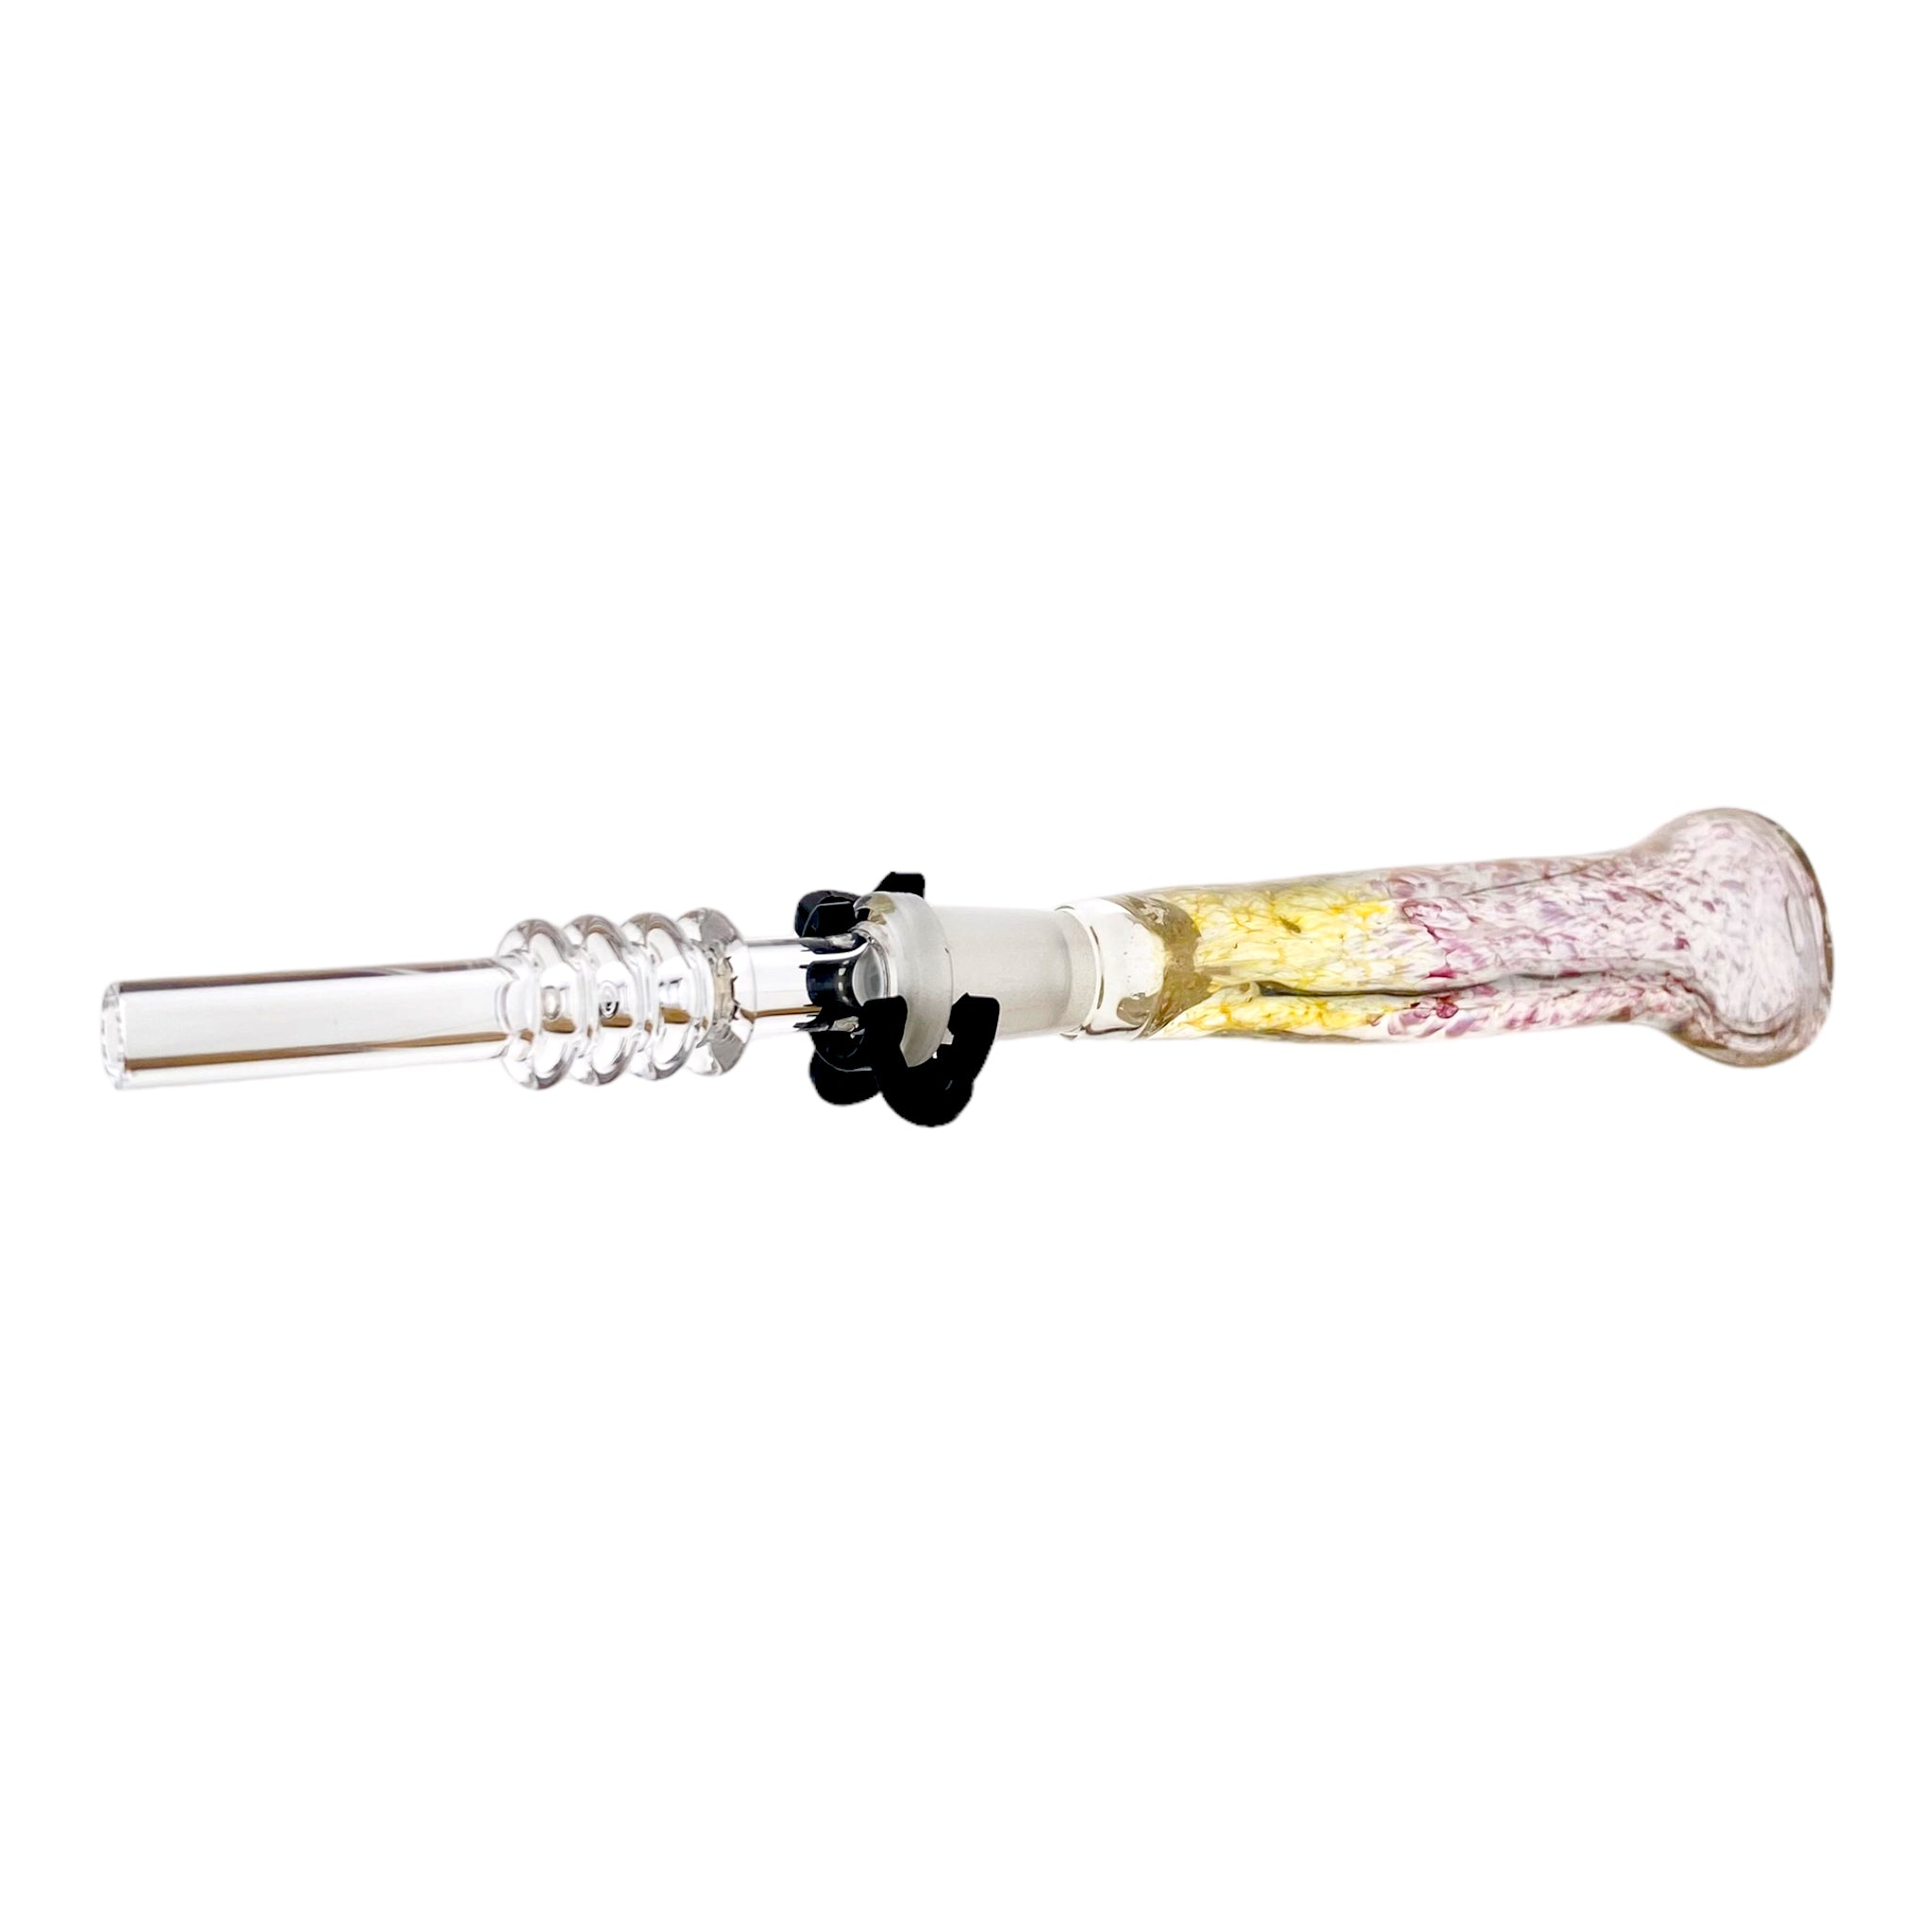 10mm Nectar Collector - Color Changing Fuming Inside Out With 10mm Quartz Tip